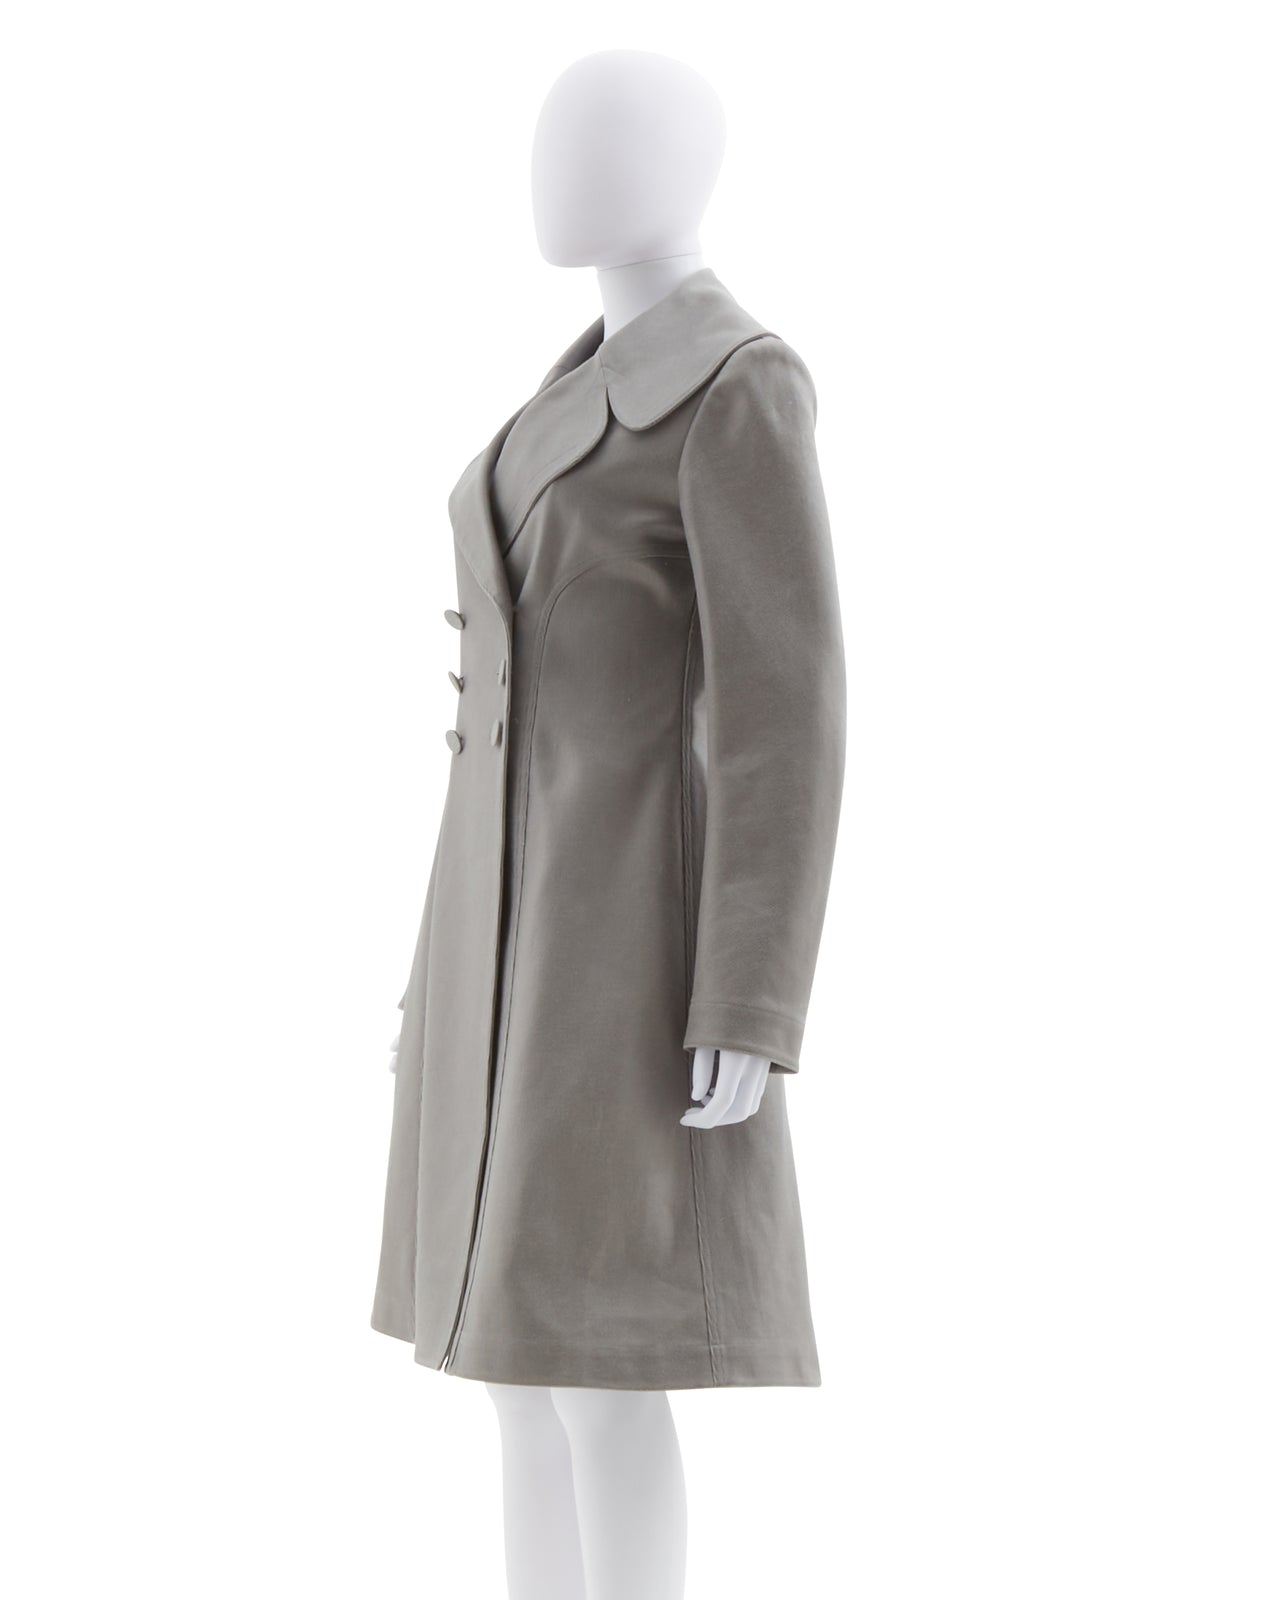 Azzedine Alaïa Early 2000s double breasted button fastenings silver and light dove grey princess coat